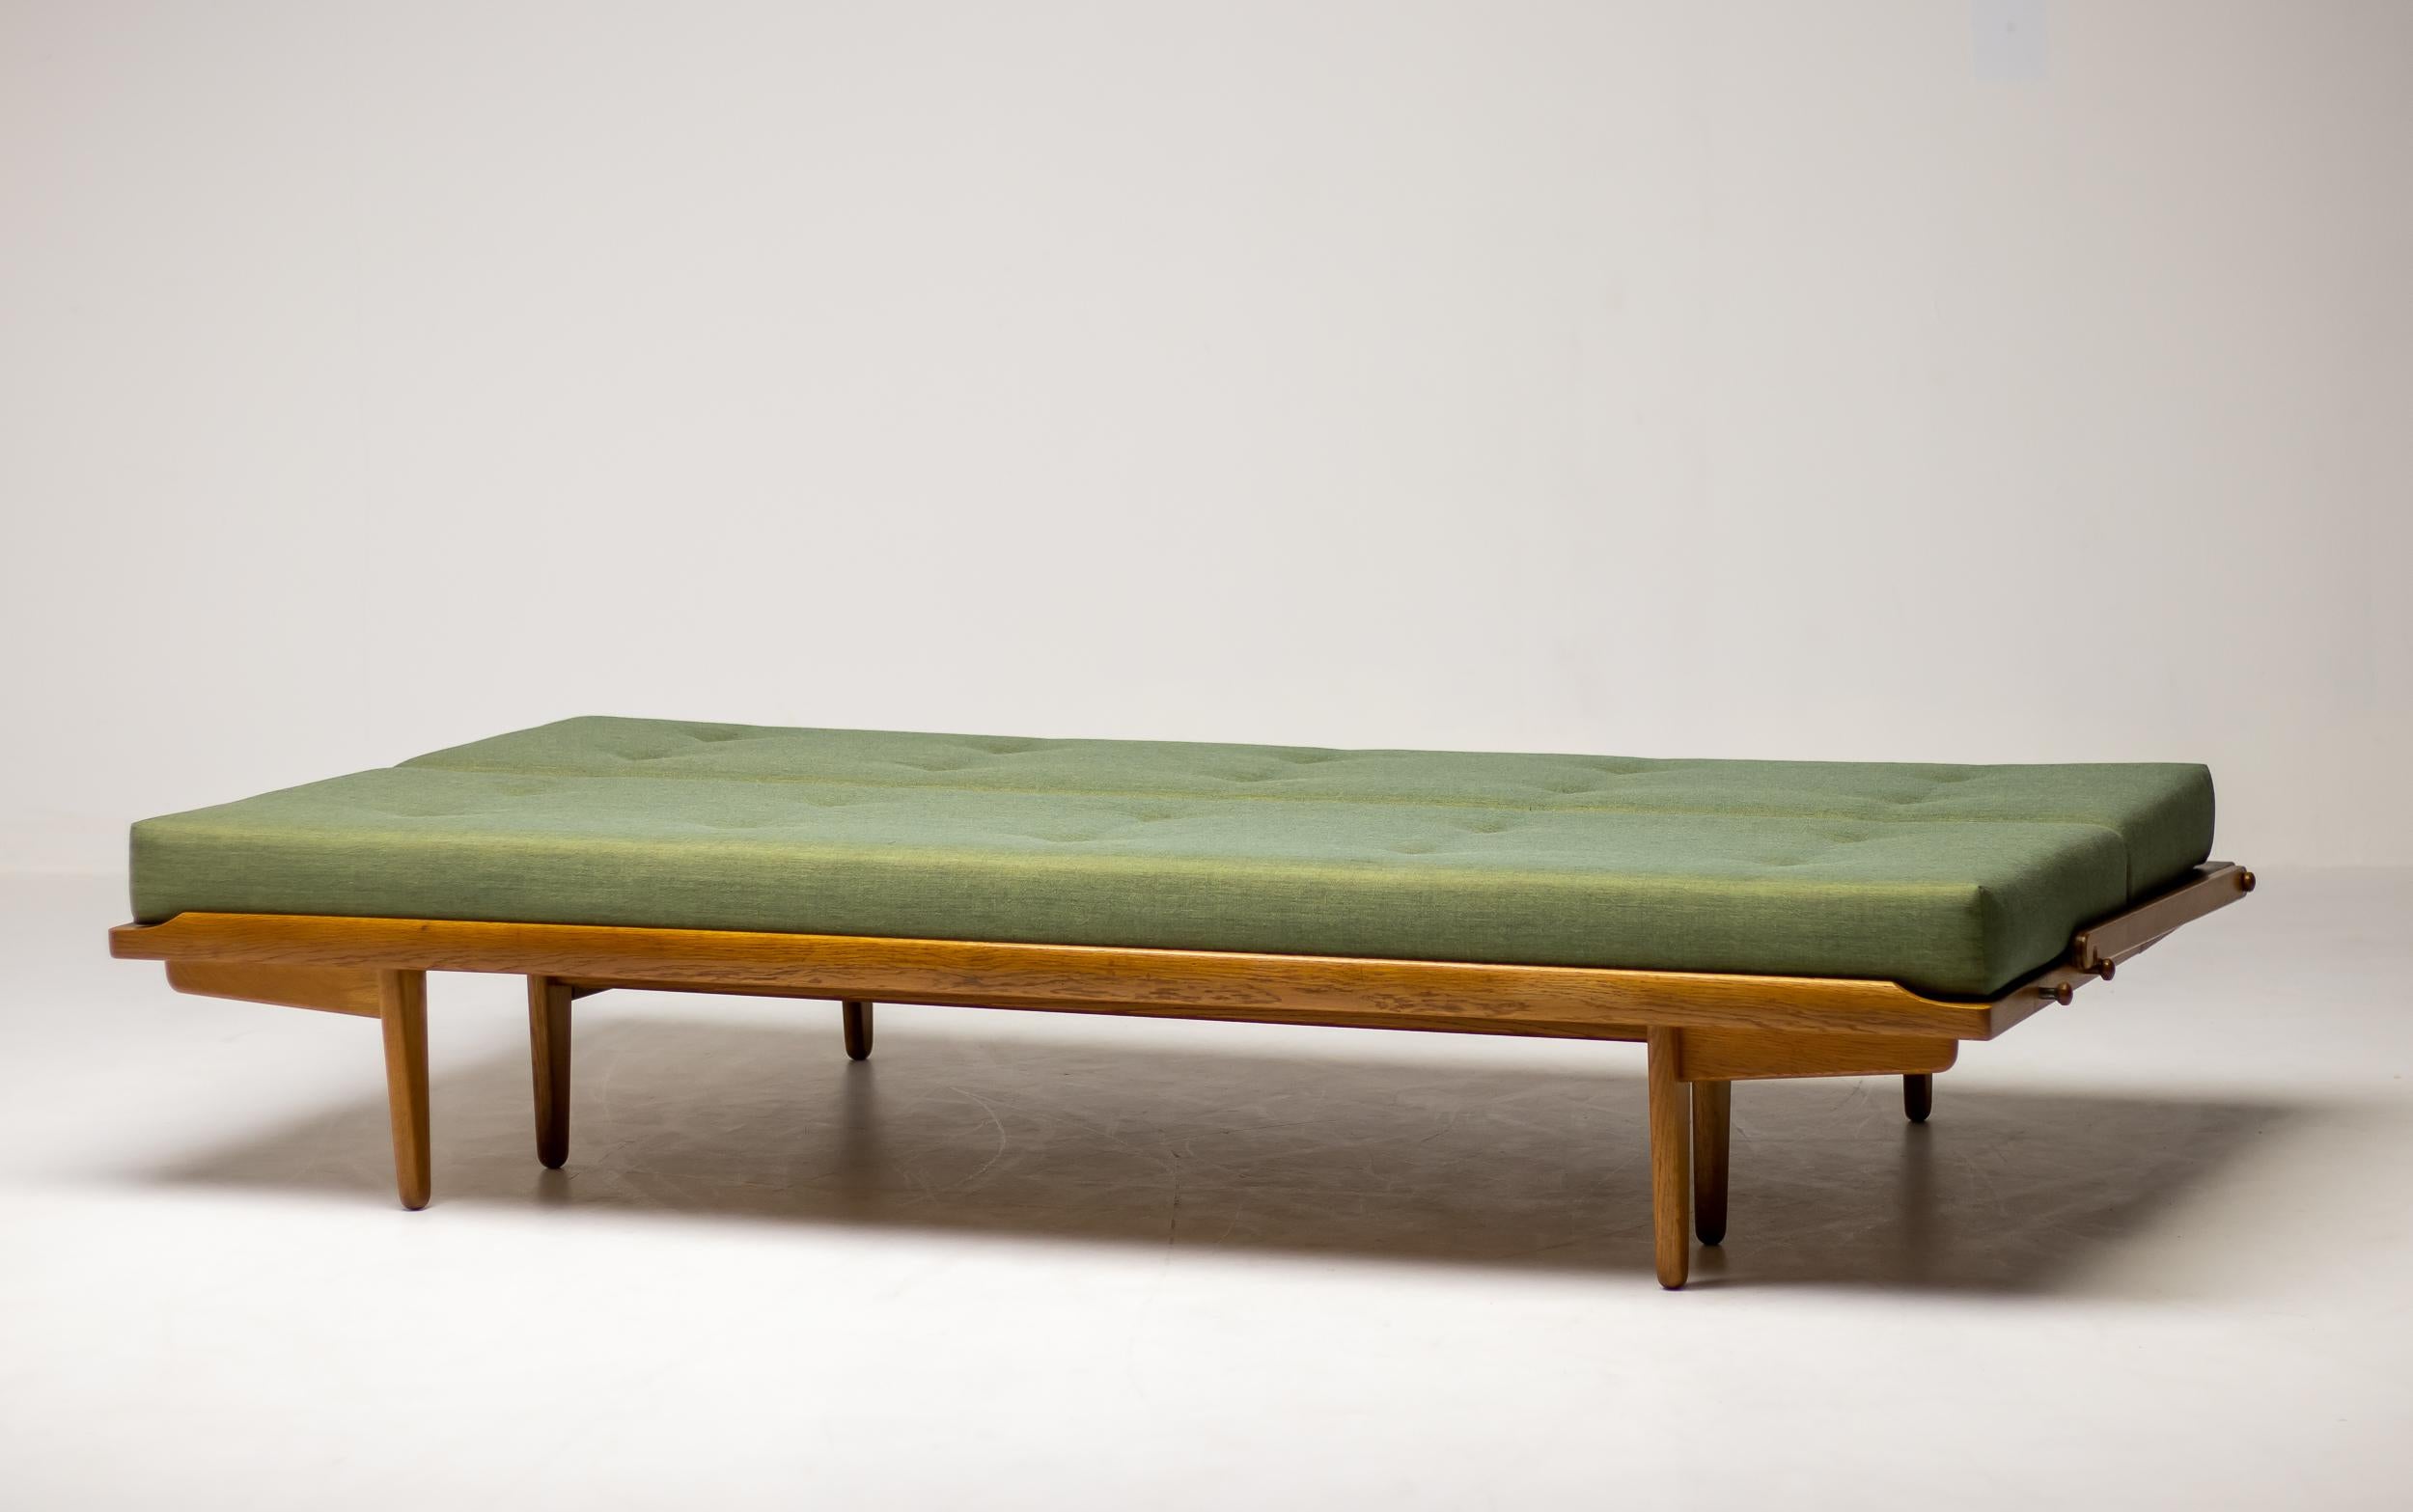 Very nice sophisticated daybed sofa Model 981 designed by Poul Volther, manufactured by Gemla, Denmark, circa 1960. This sofa is nicknamed 'Diva' and features a sophisticated solid oak base that can be folded down to create a daybed. The sofa is